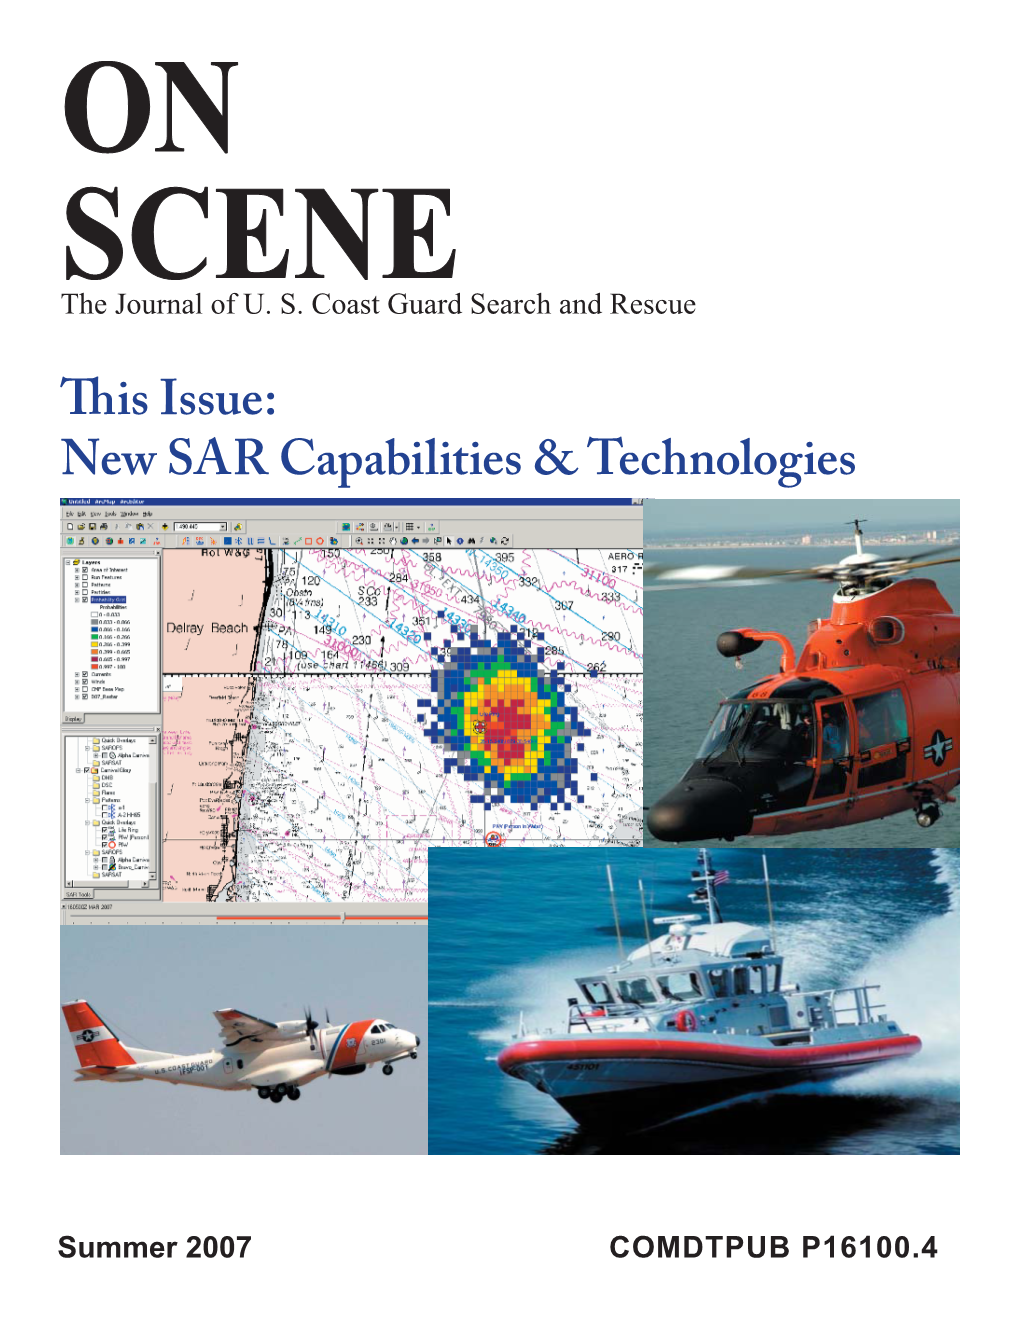 The Journal of US Coast Guard Search and Rescue